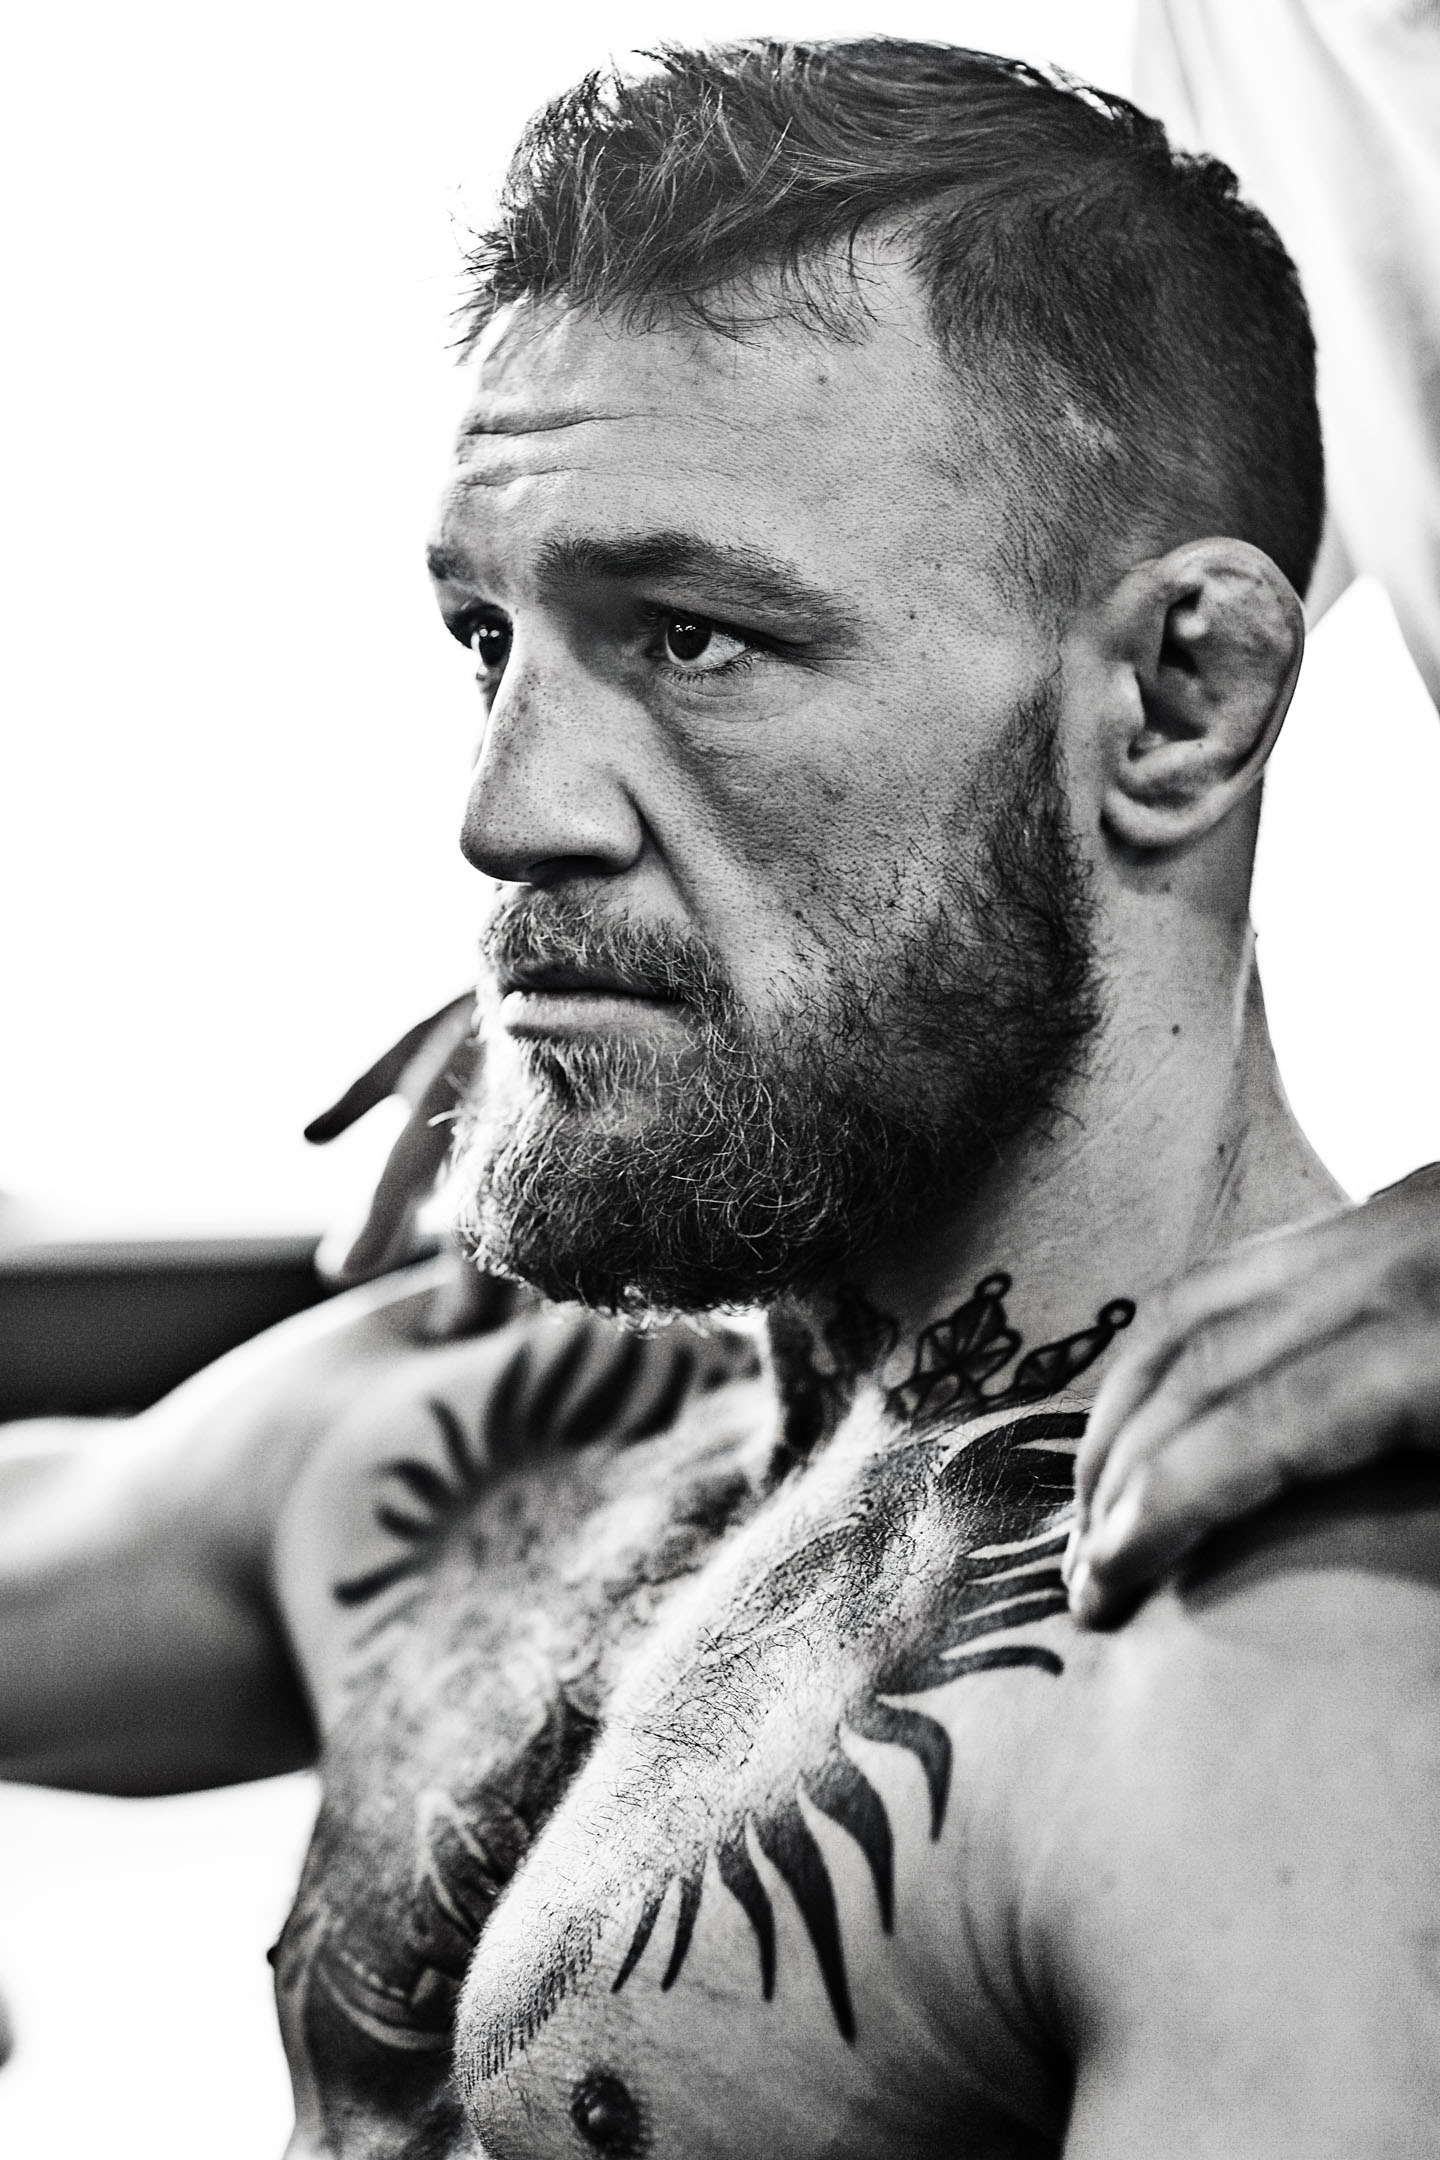 Monster Energy Announces Continued Sponsorship Deal With MMA Superstar  Conor “The Notorious” McGregor